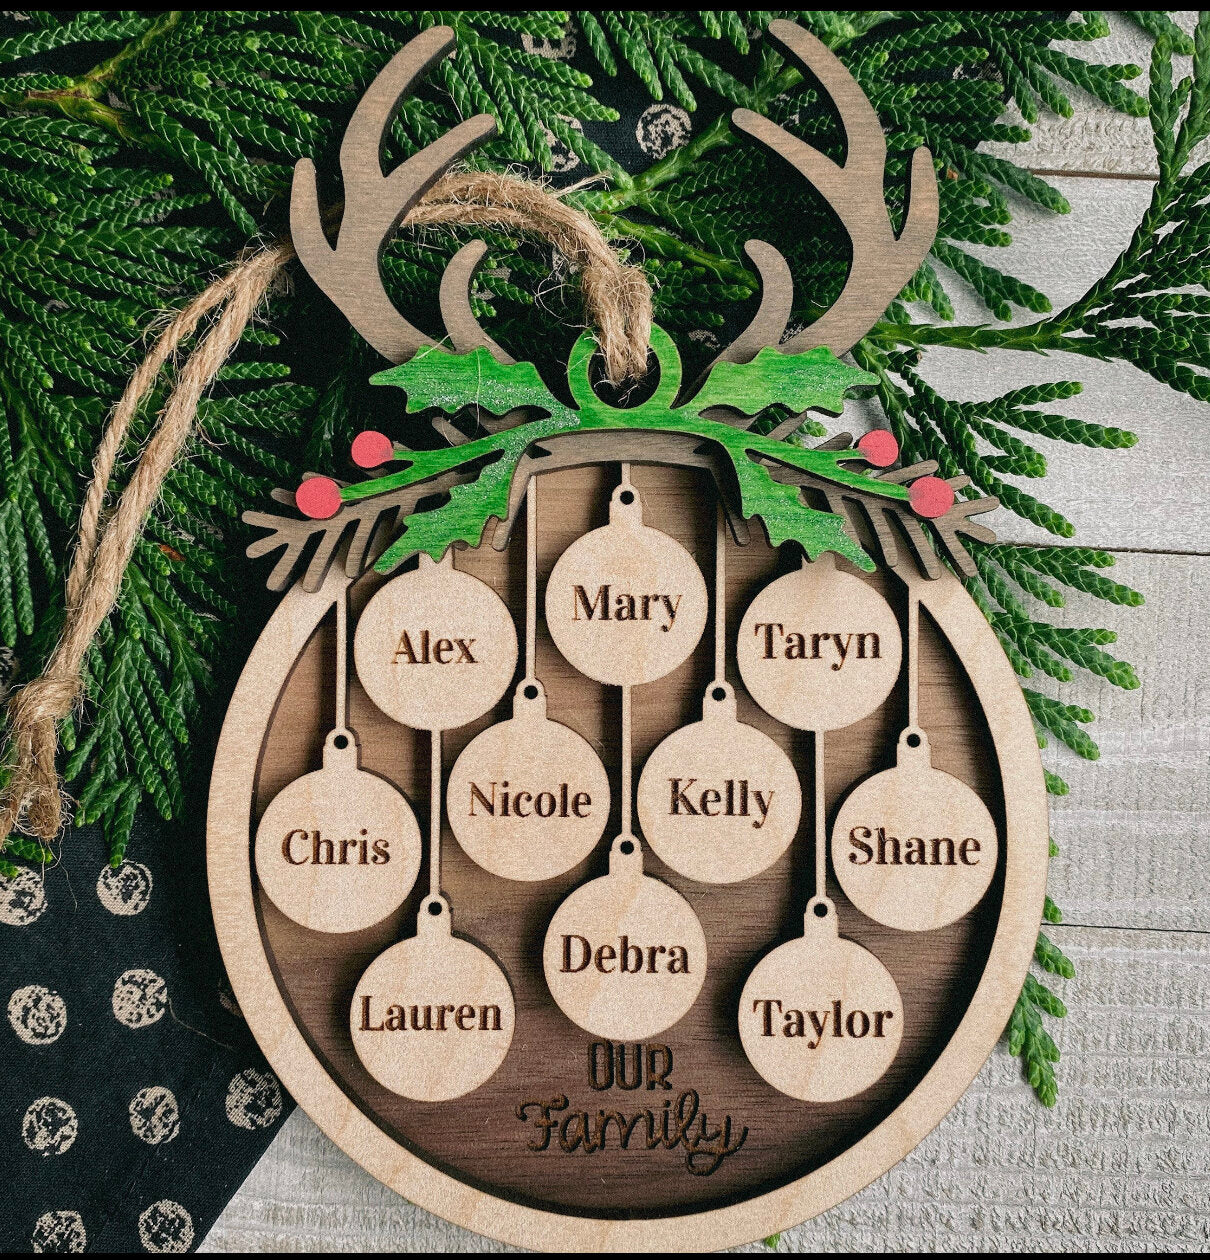 Personalized Christmas Bulbs Ornament